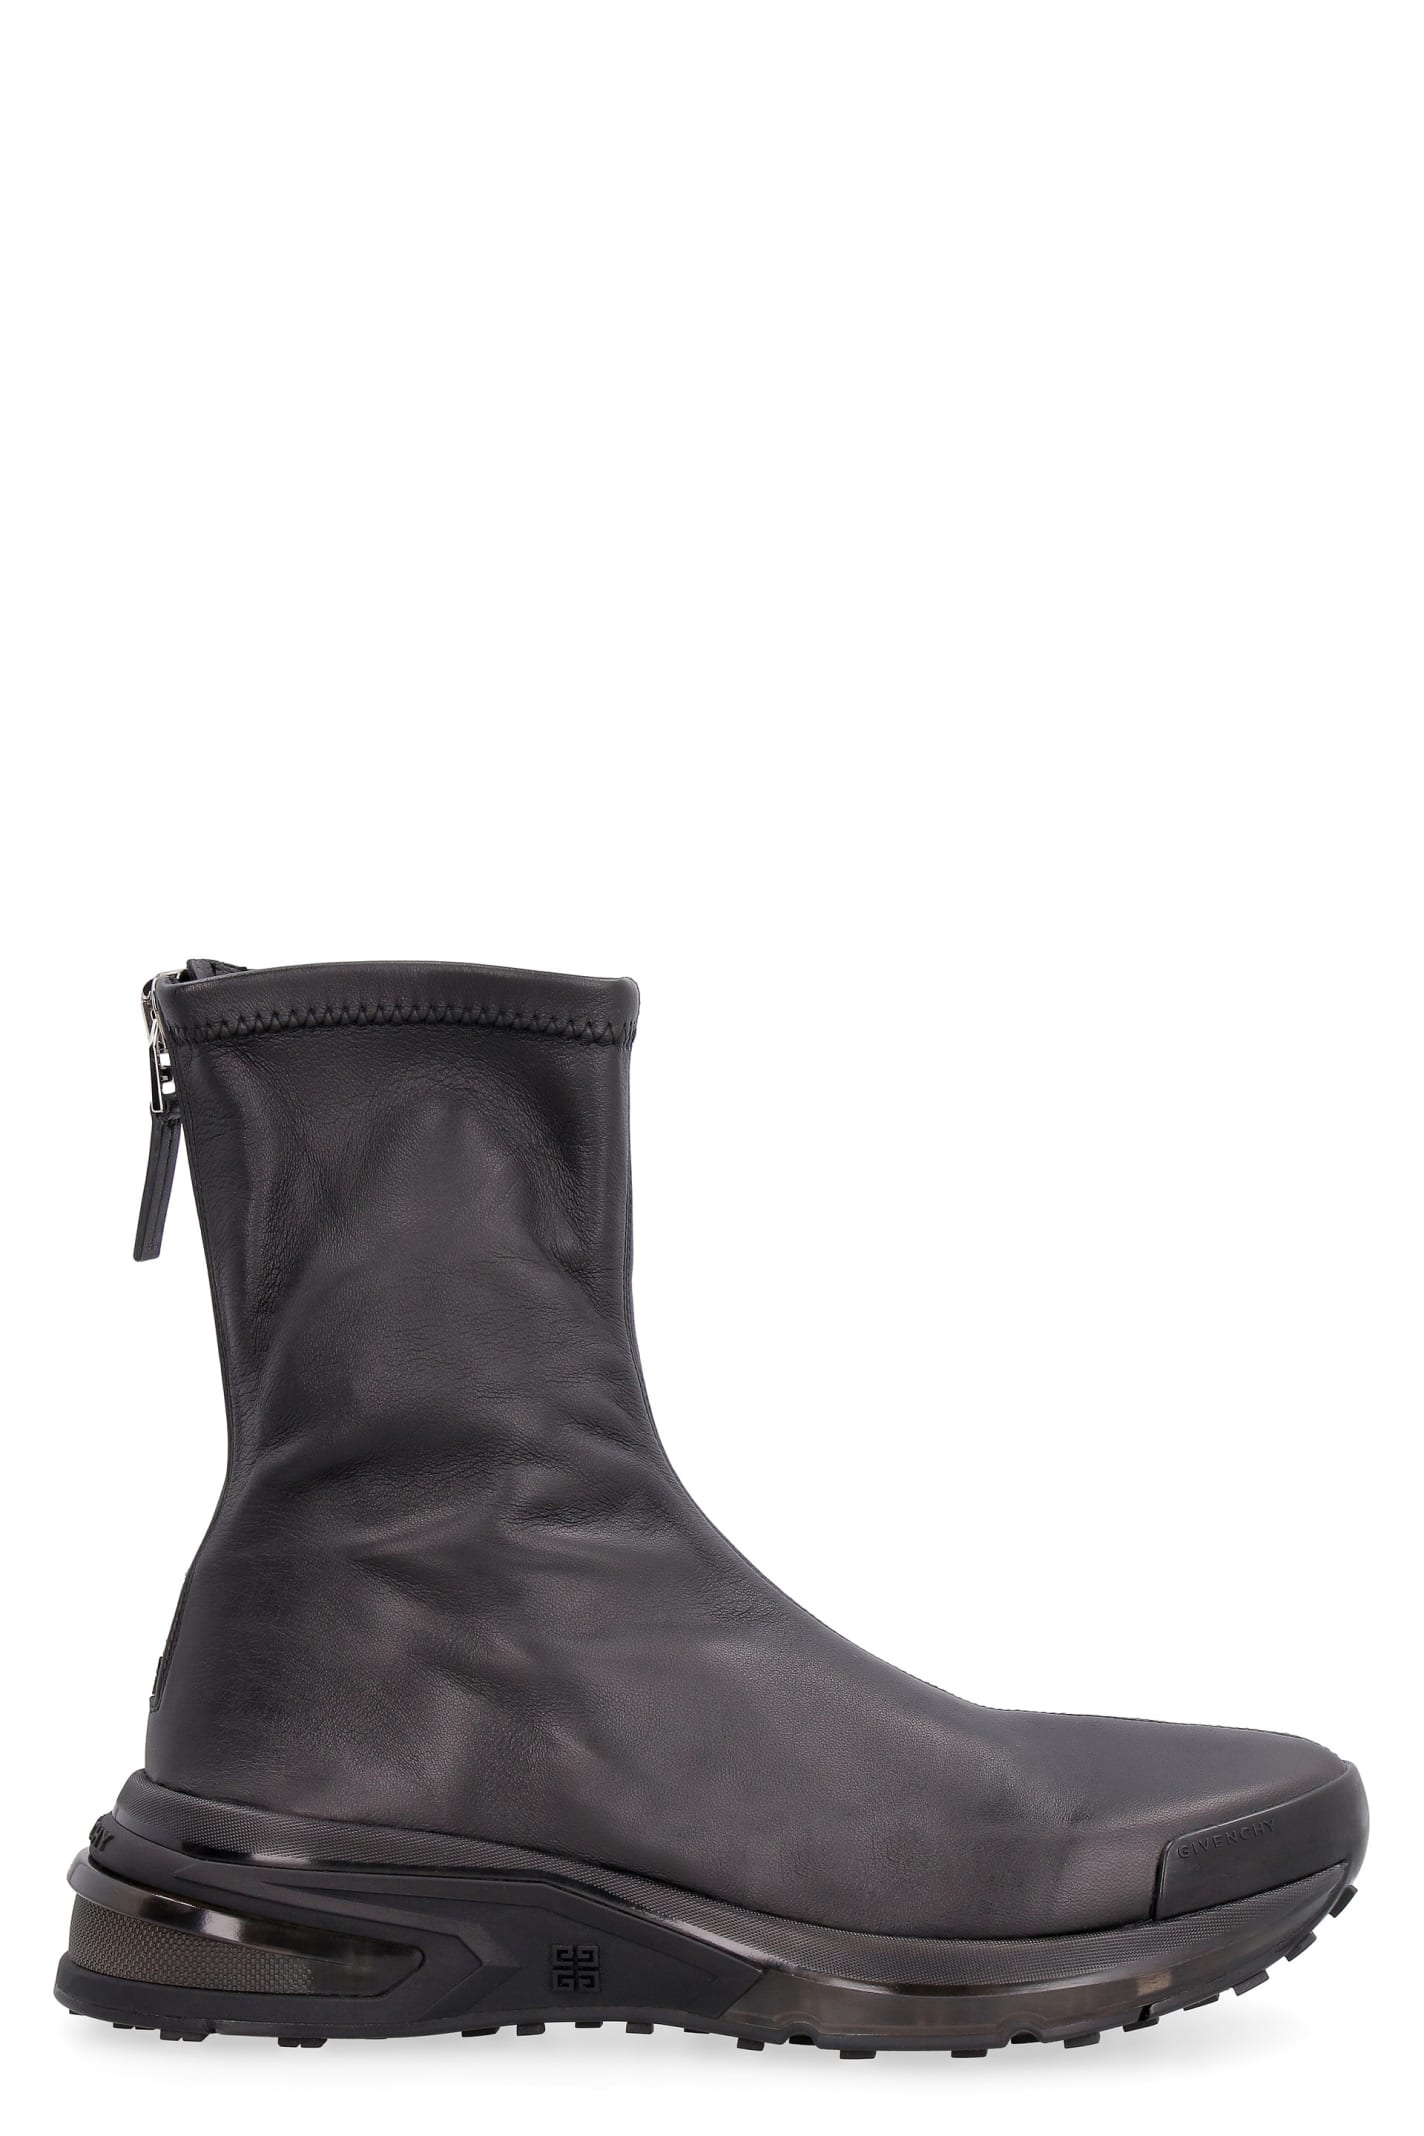 Givenchy Giv 1 Leather Ankle Boots